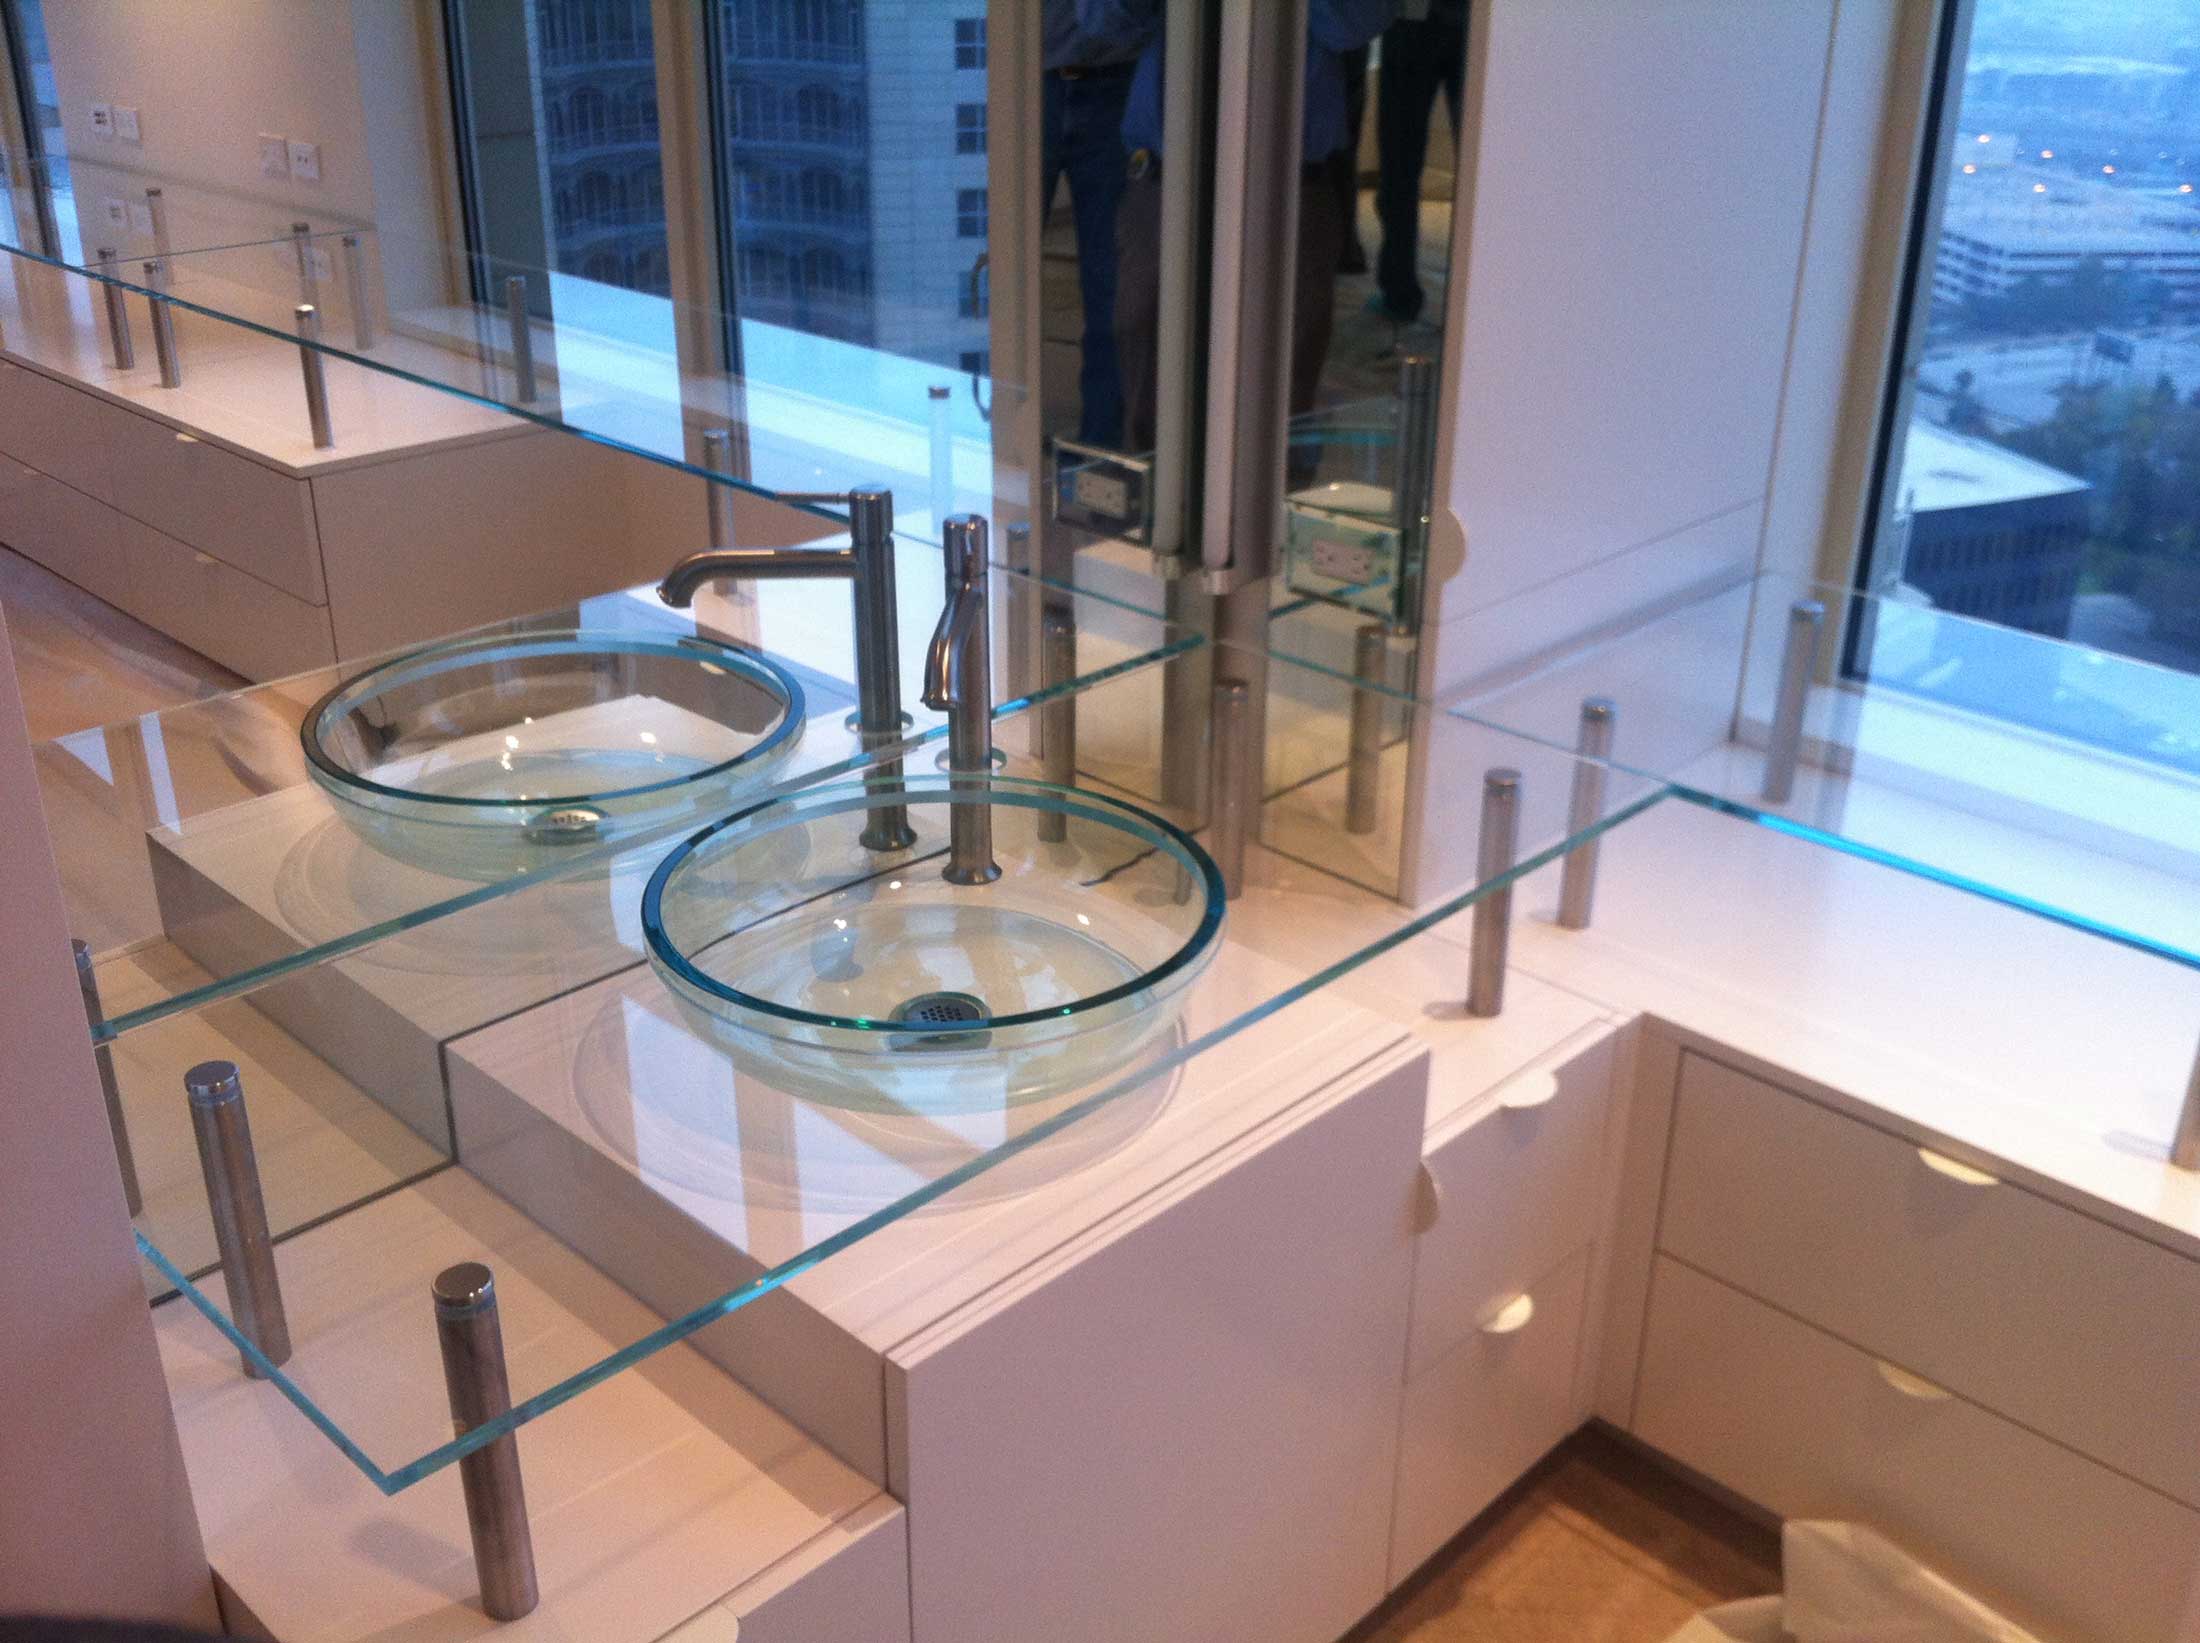 Bathroom with glass sink and counter